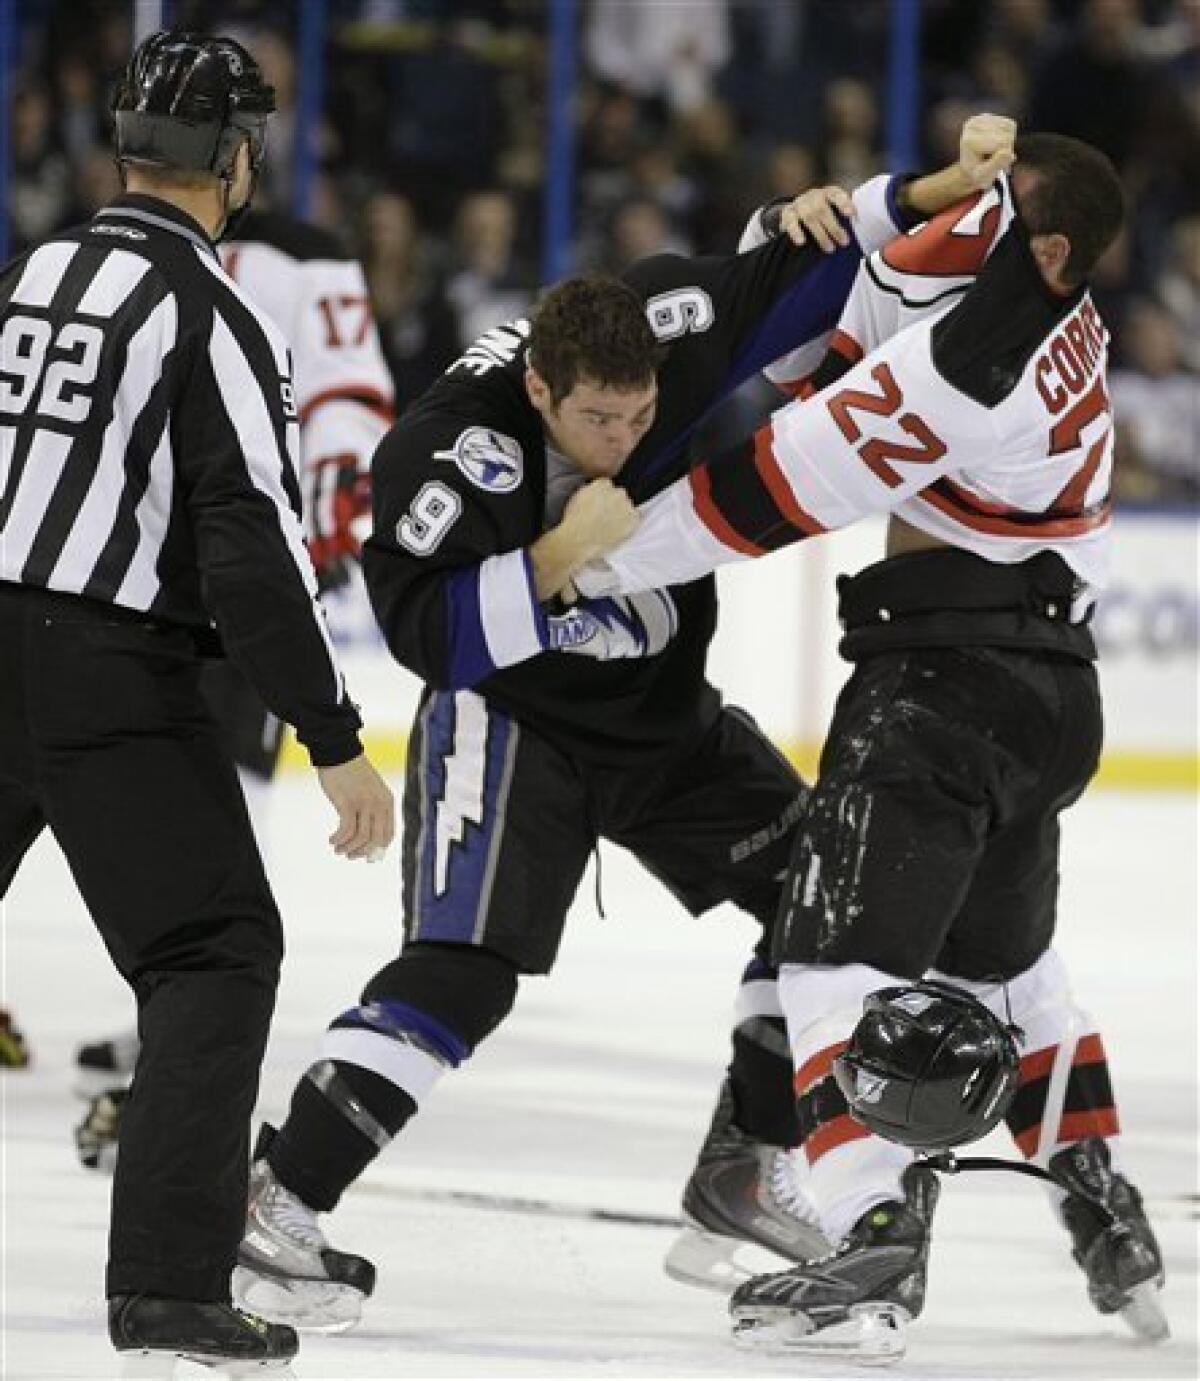 New Jersey Devils Colin White (5) and Tampa Bay Lightning Dan